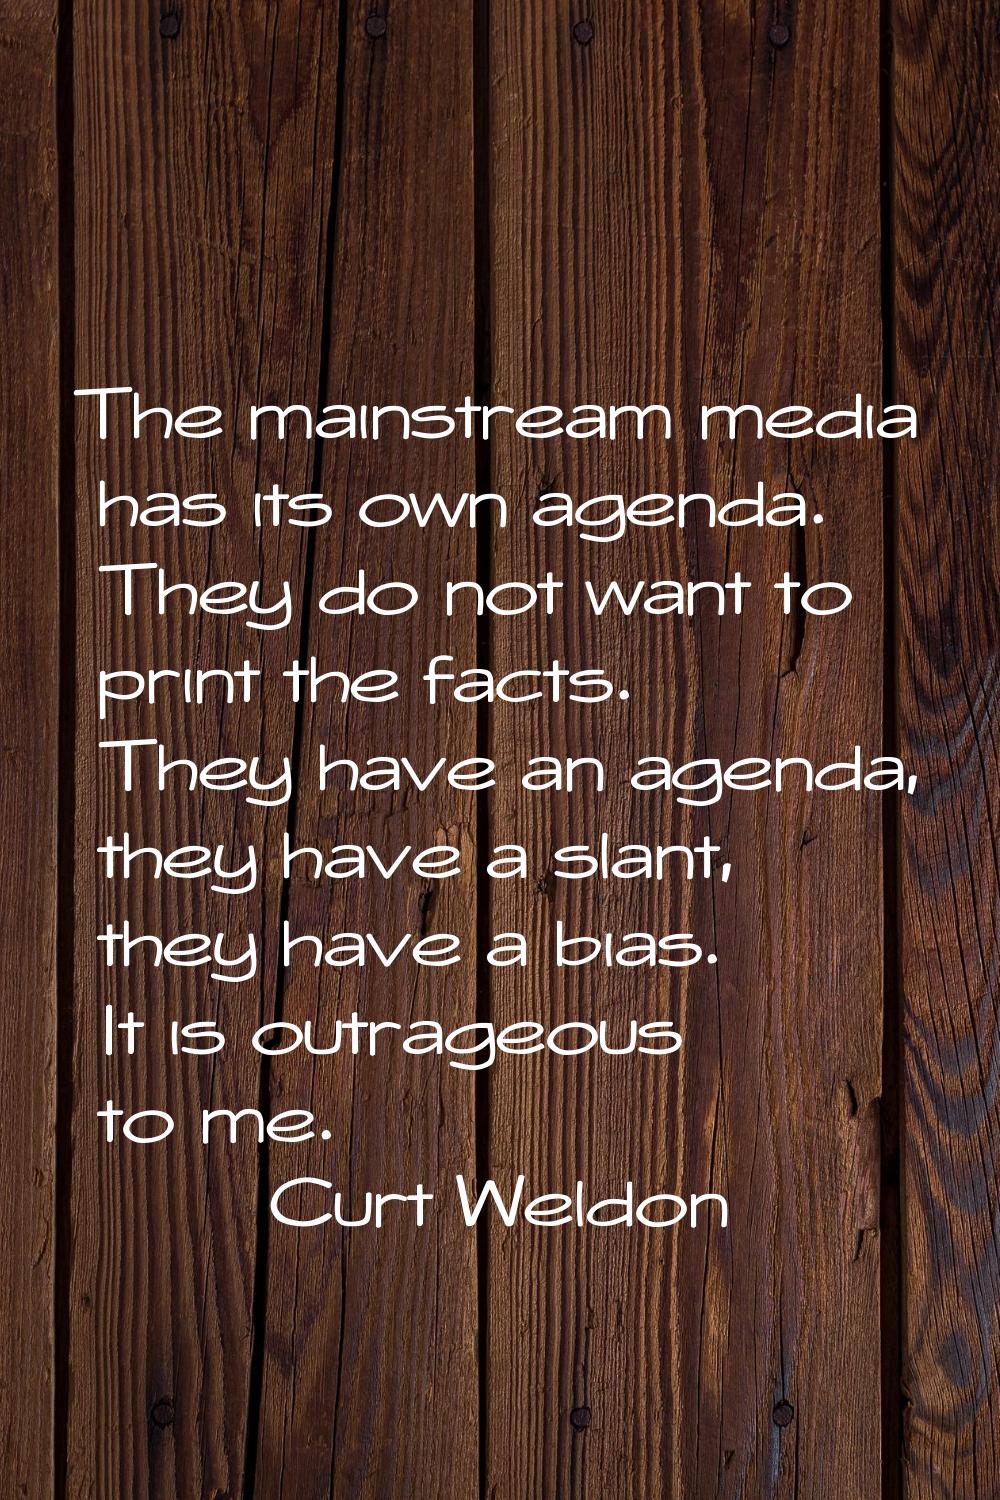 The mainstream media has its own agenda. They do not want to print the facts. They have an agenda, 